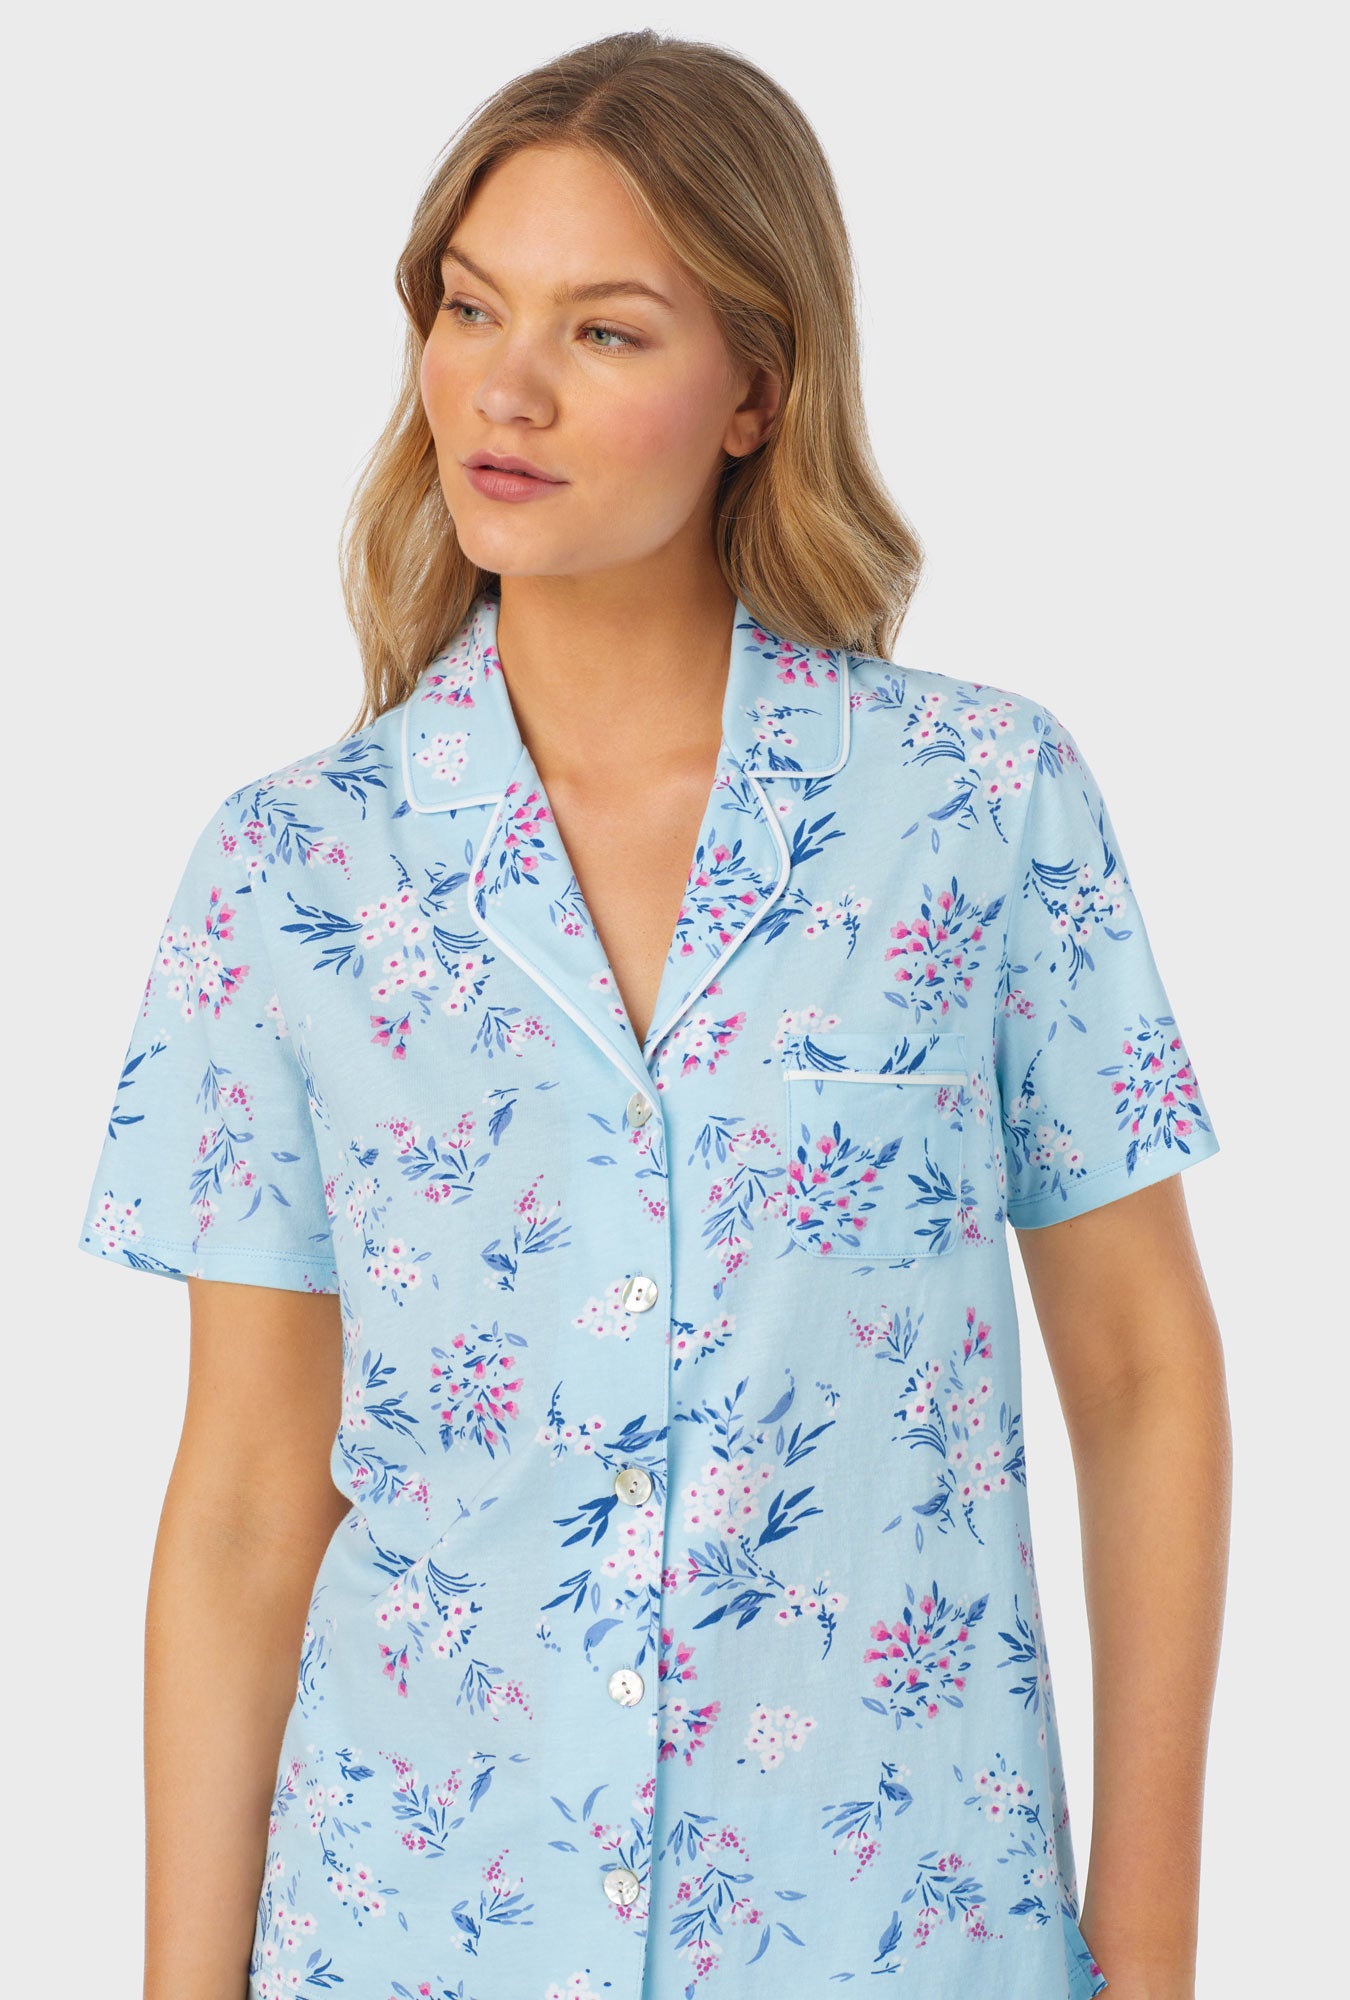 A lady wearing blue short sleeve long pajama set with summer blooms print.